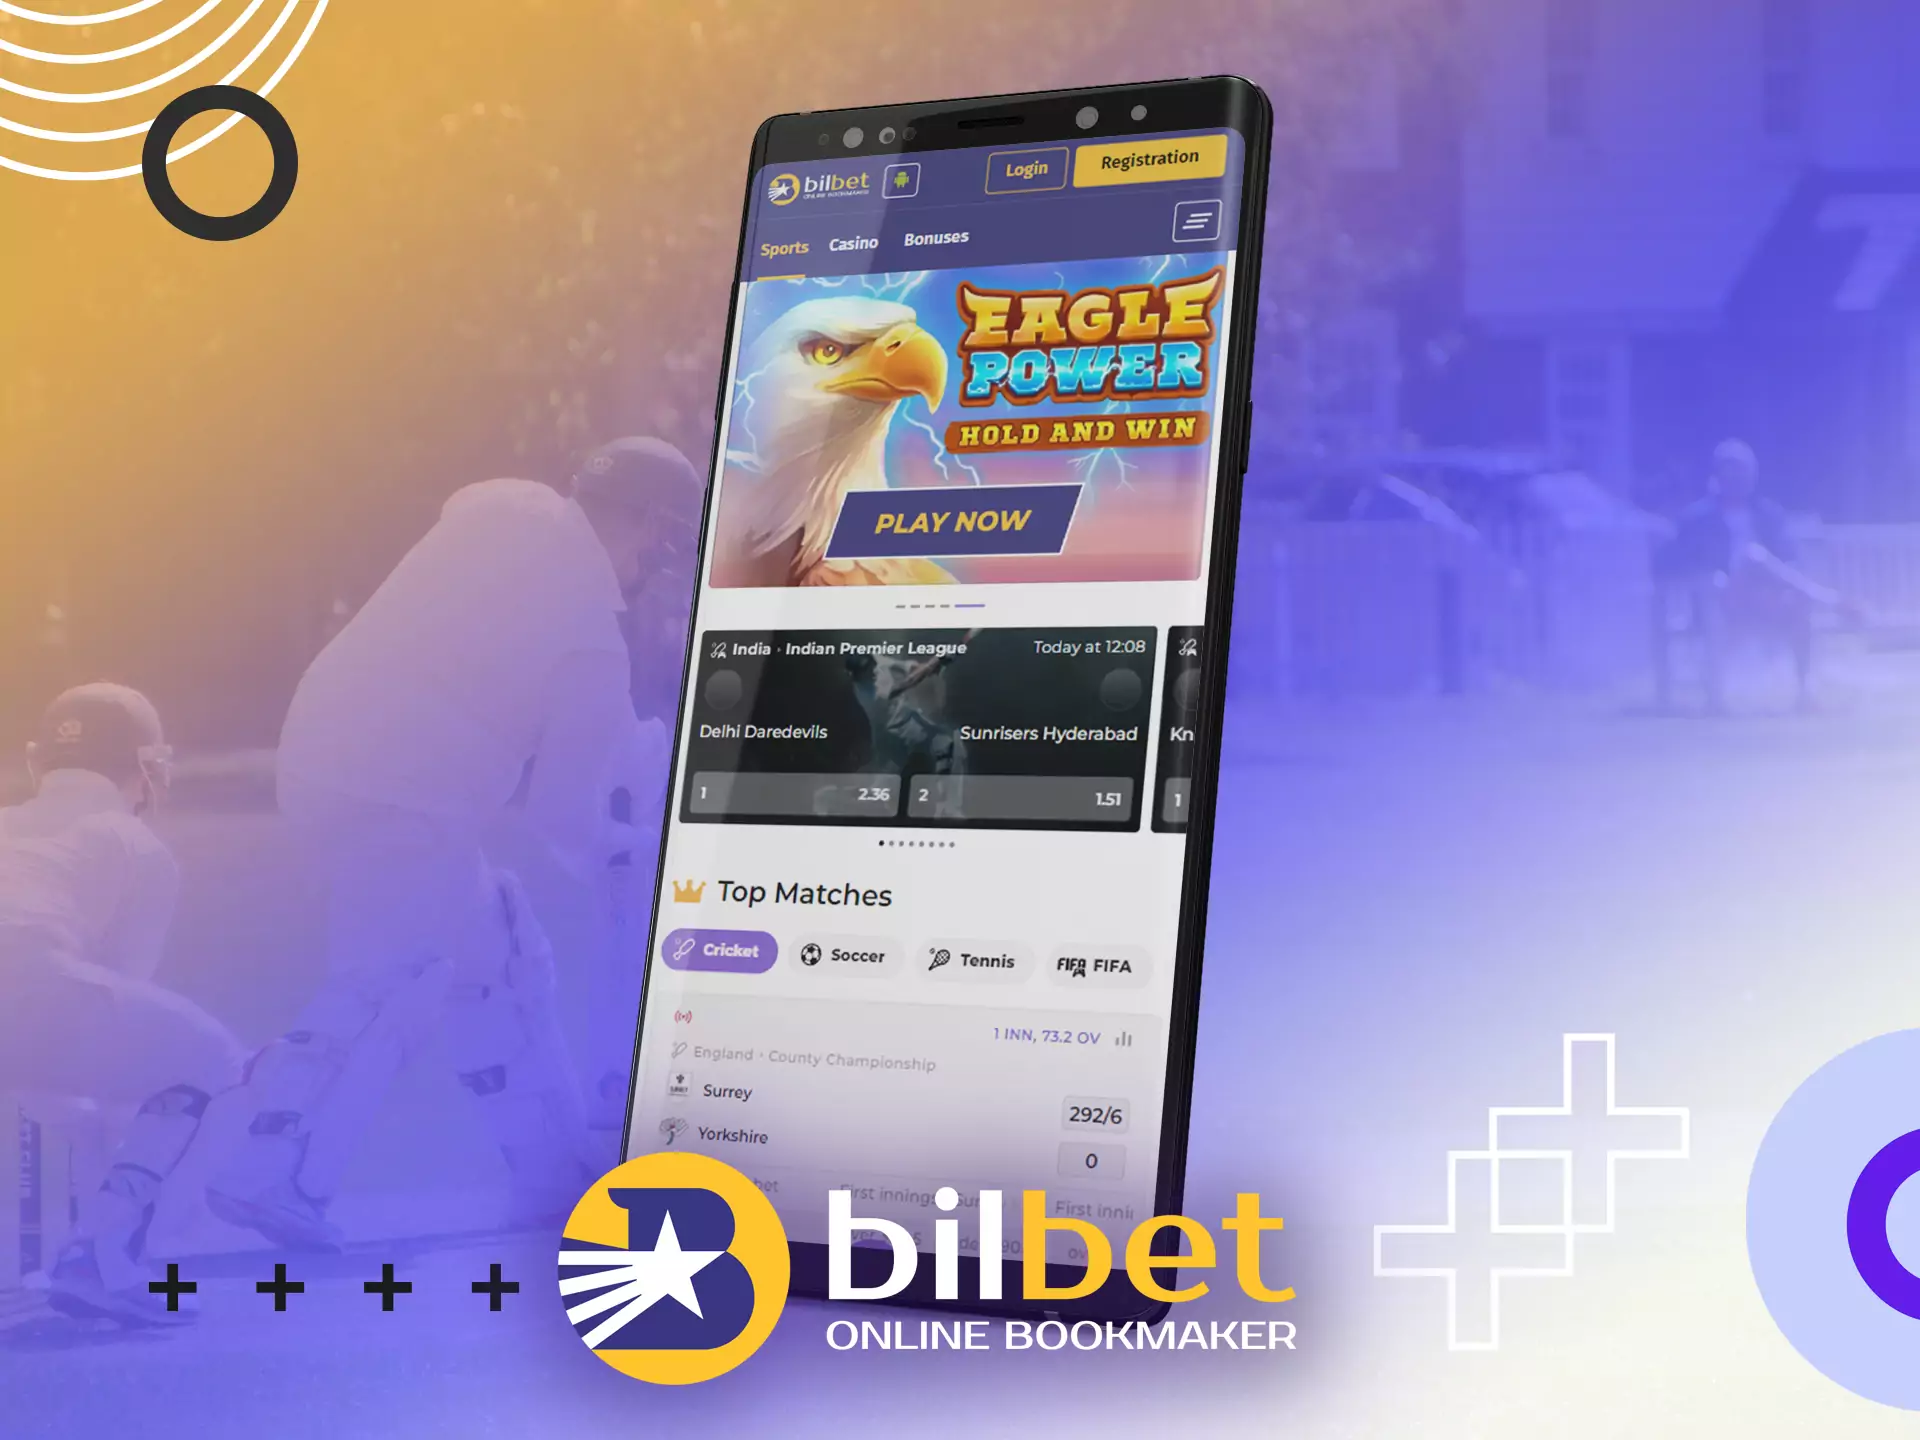 The Bilbet mobile website works great on any device.